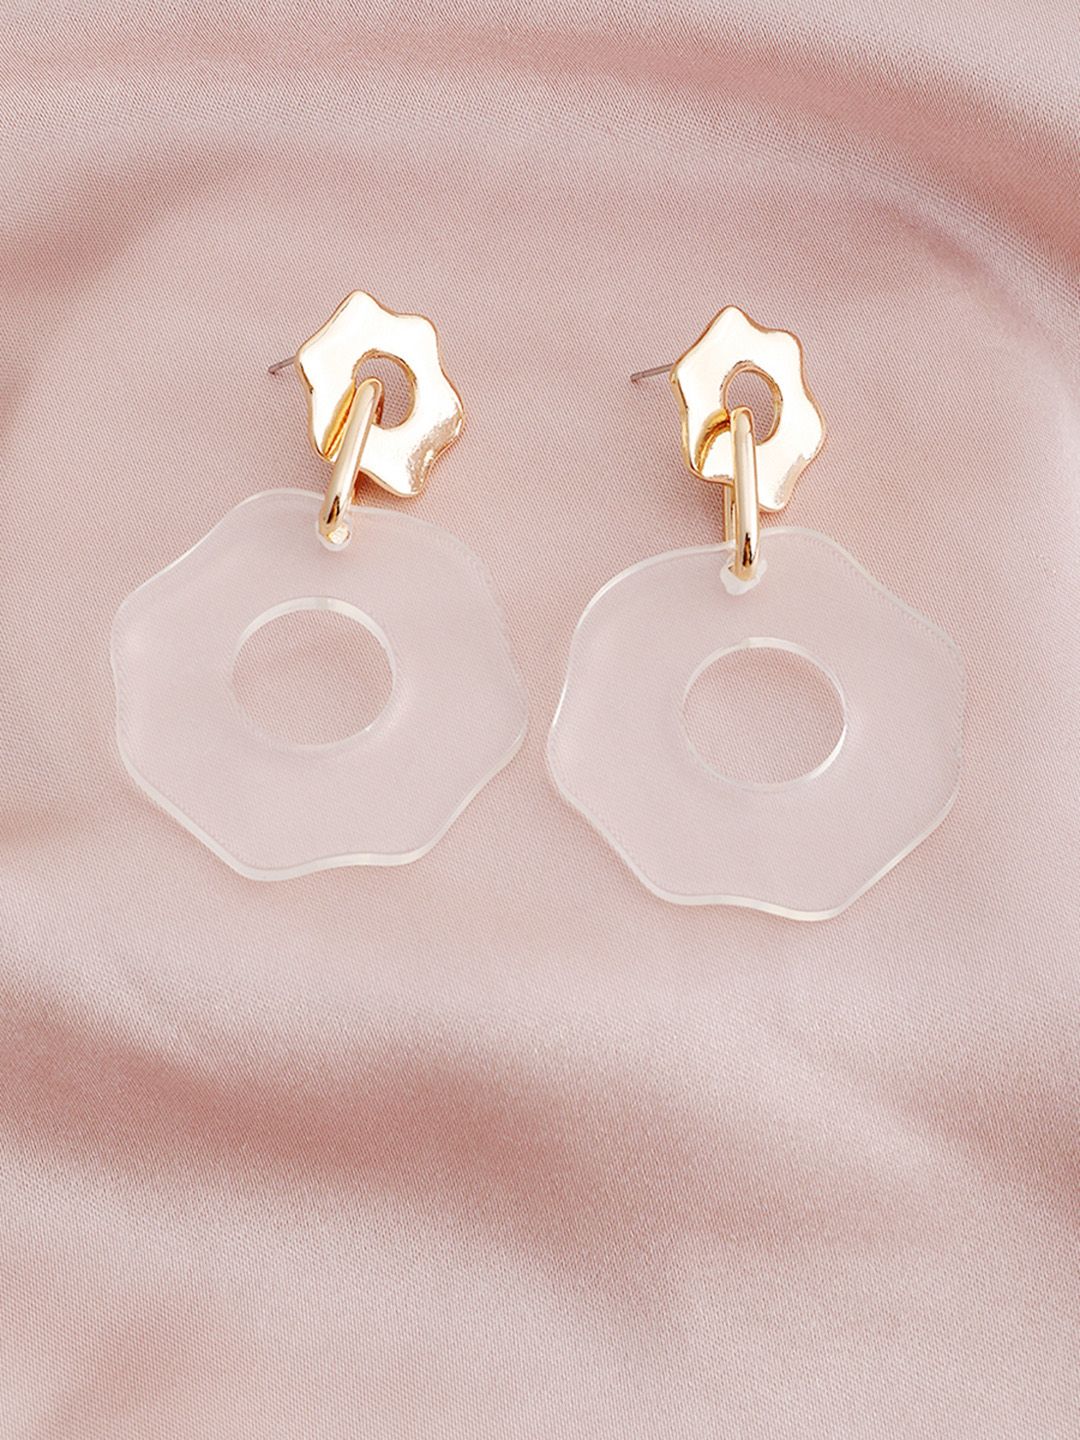 URBANIC Gold-Toned Floral Drop Earrings Price in India